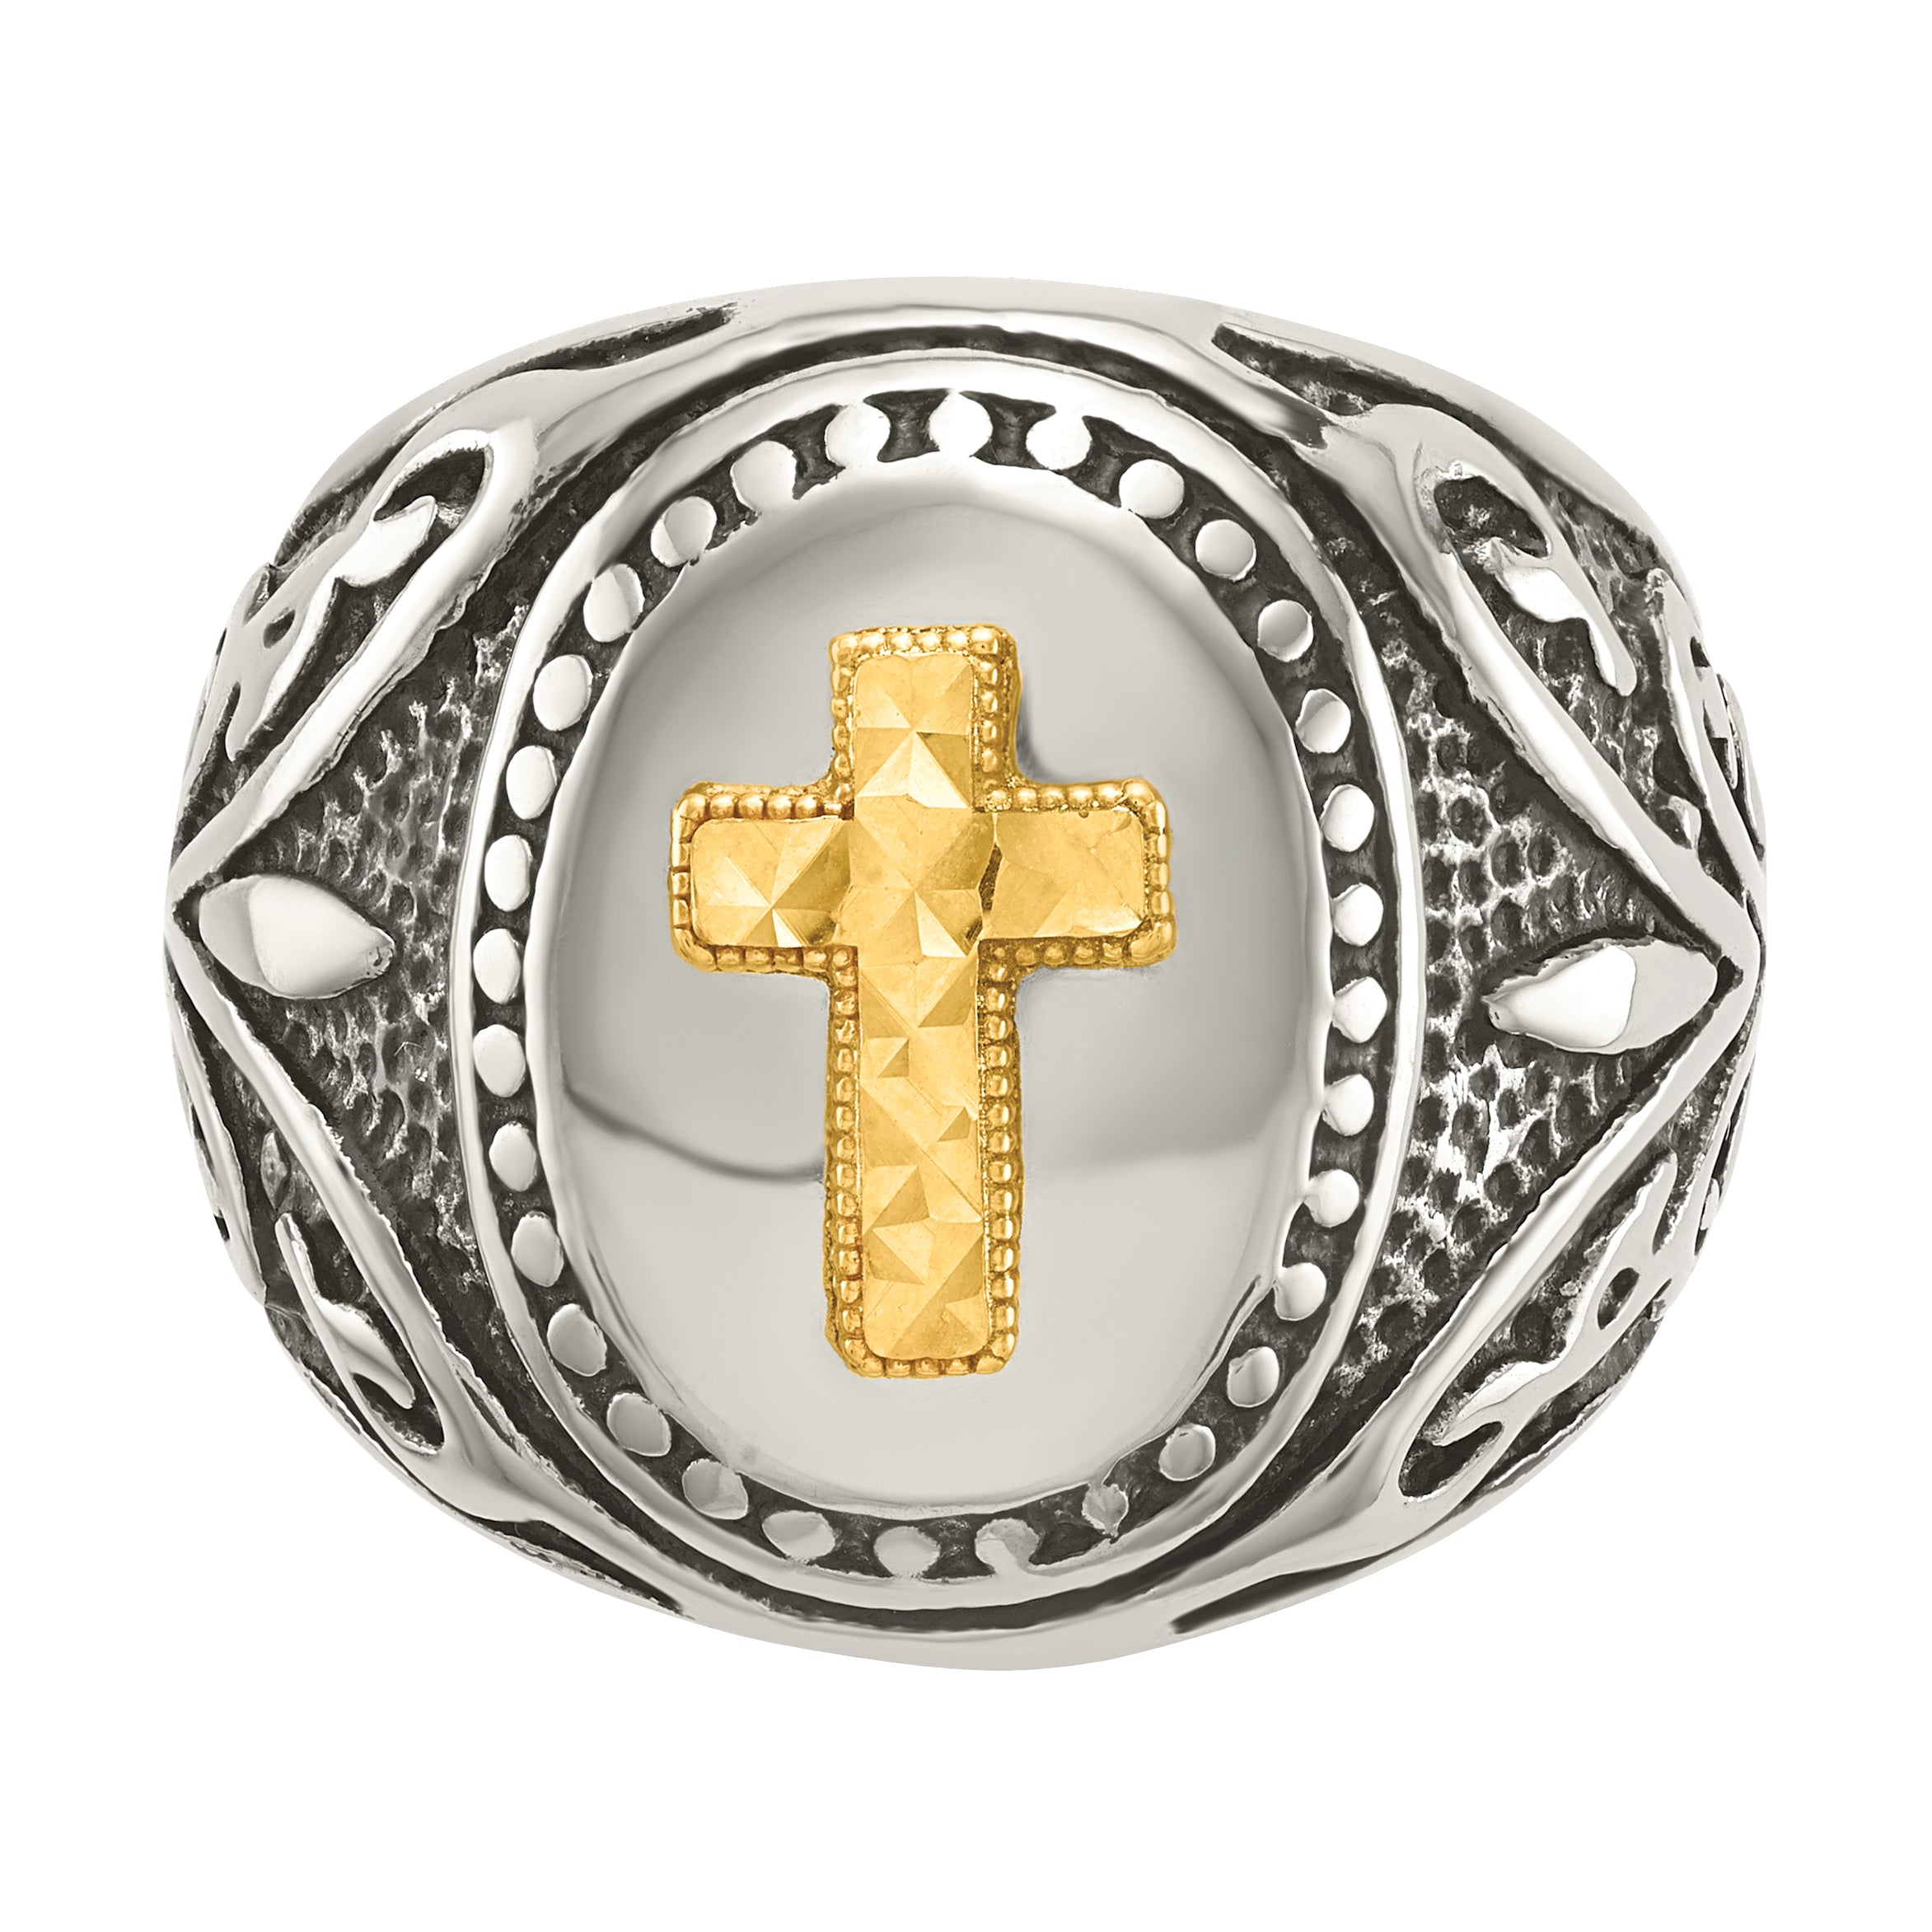 Stainless Steel with 14k Gold Accent Antiqued and Polished Cross Ring